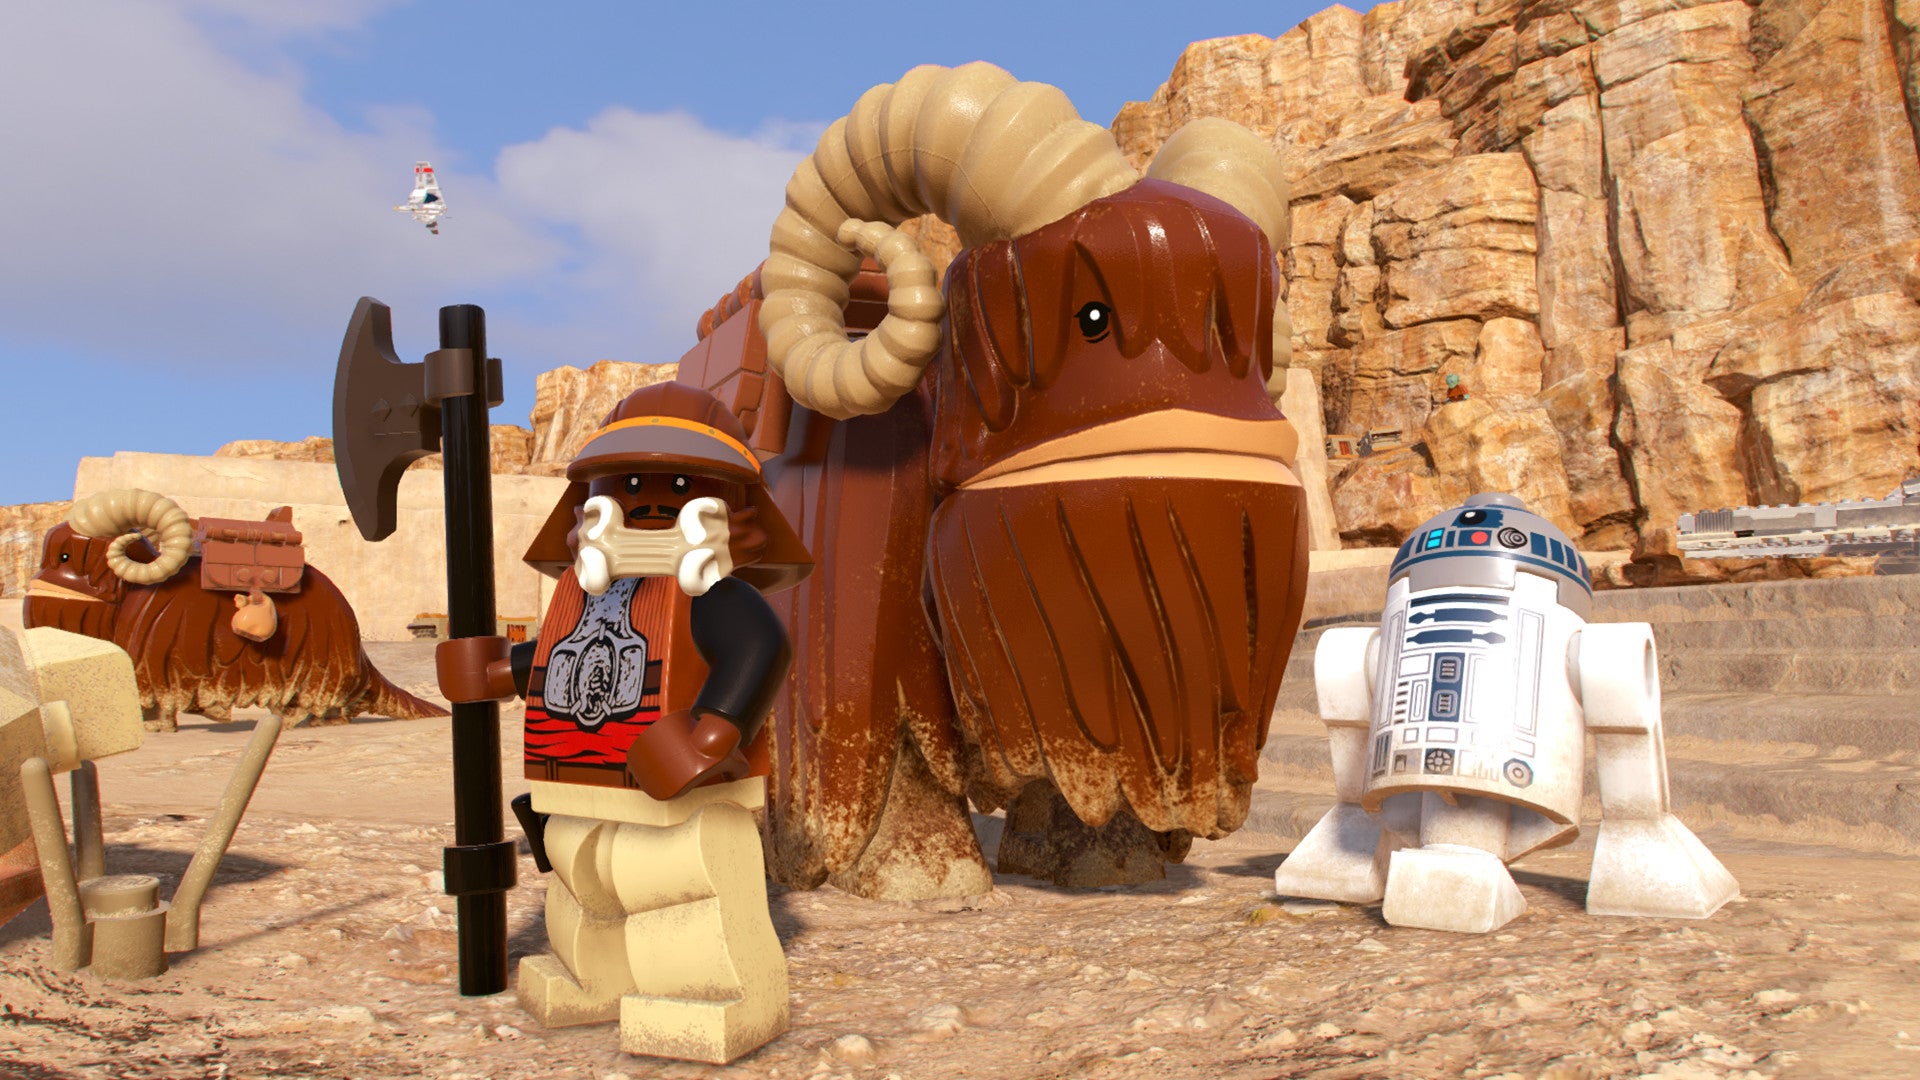 R2-D2 and an axe-wielding character flank a large buffalo-creature in Lego Star Wars: The Skywalker Saga.